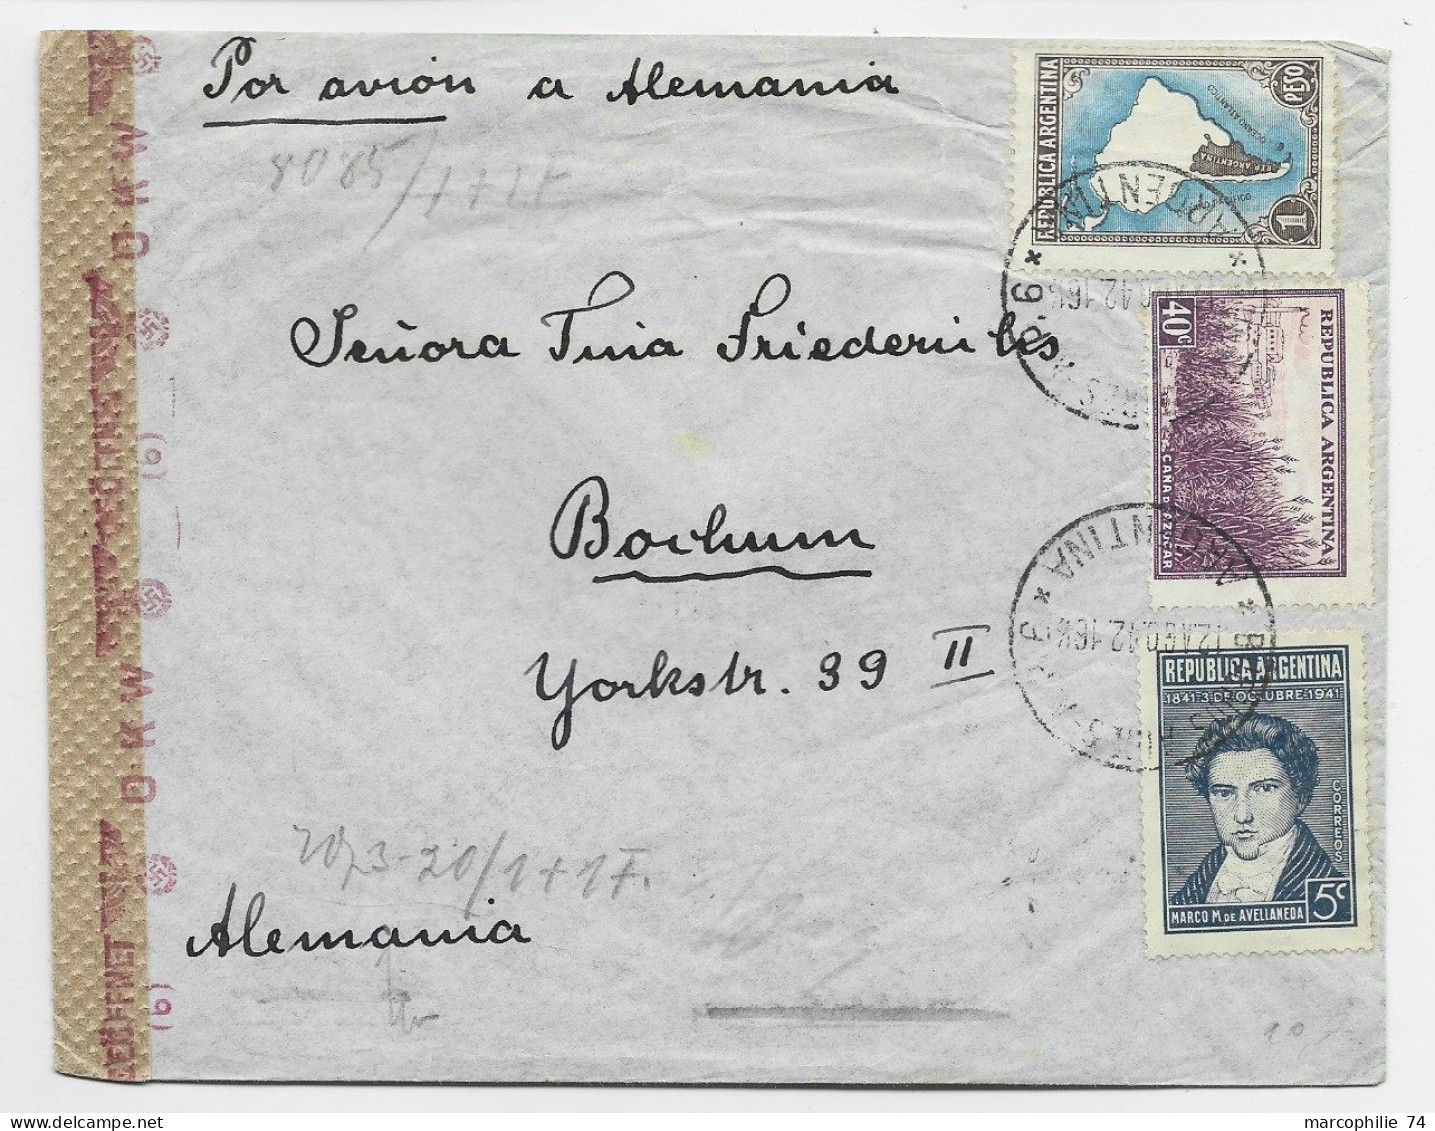 ARGENTINA LETTRE COVER AVION BUENOS AYRES 1942 TO GERMANY  VIA PORTUGAL CENSURE NAZO OKW - Covers & Documents